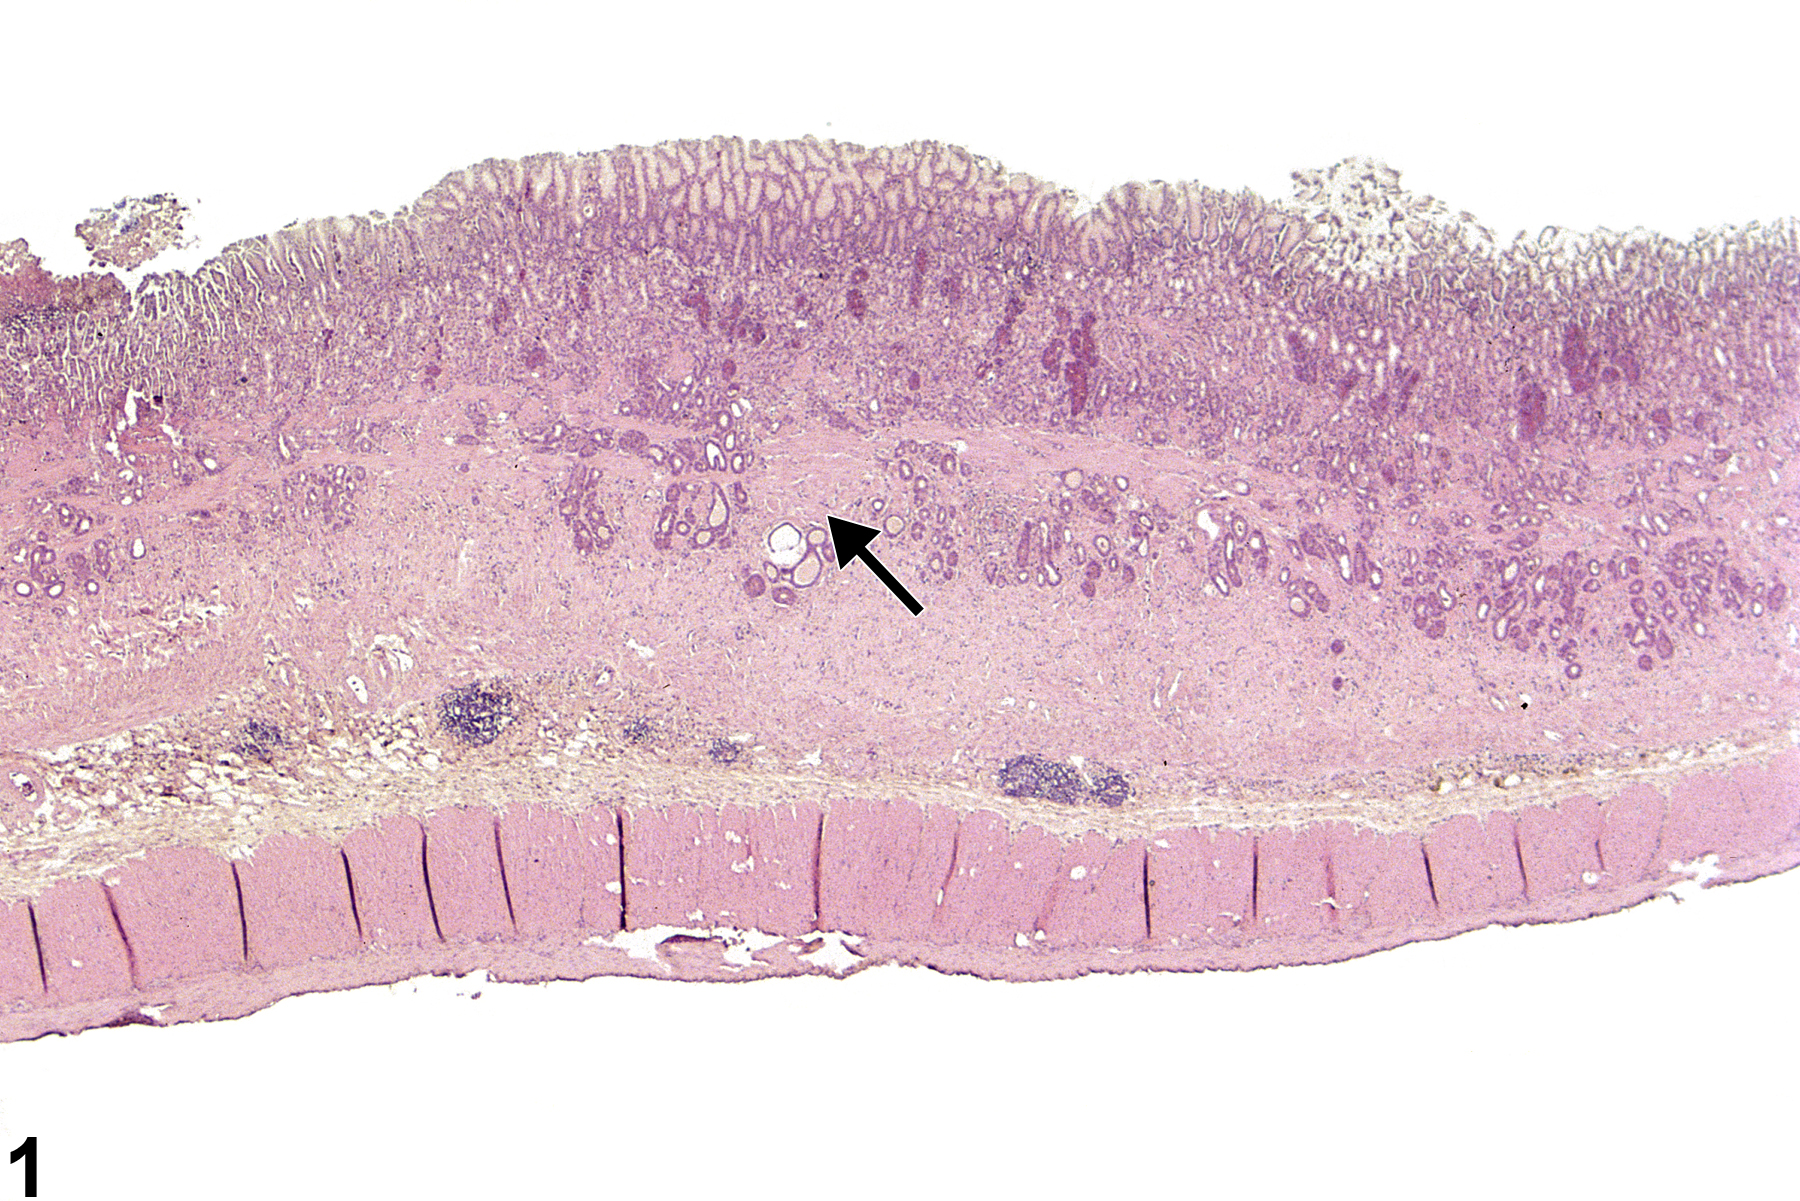 Image of fibrosis in the glandular stomach from a male F344/N rat in a chronic study